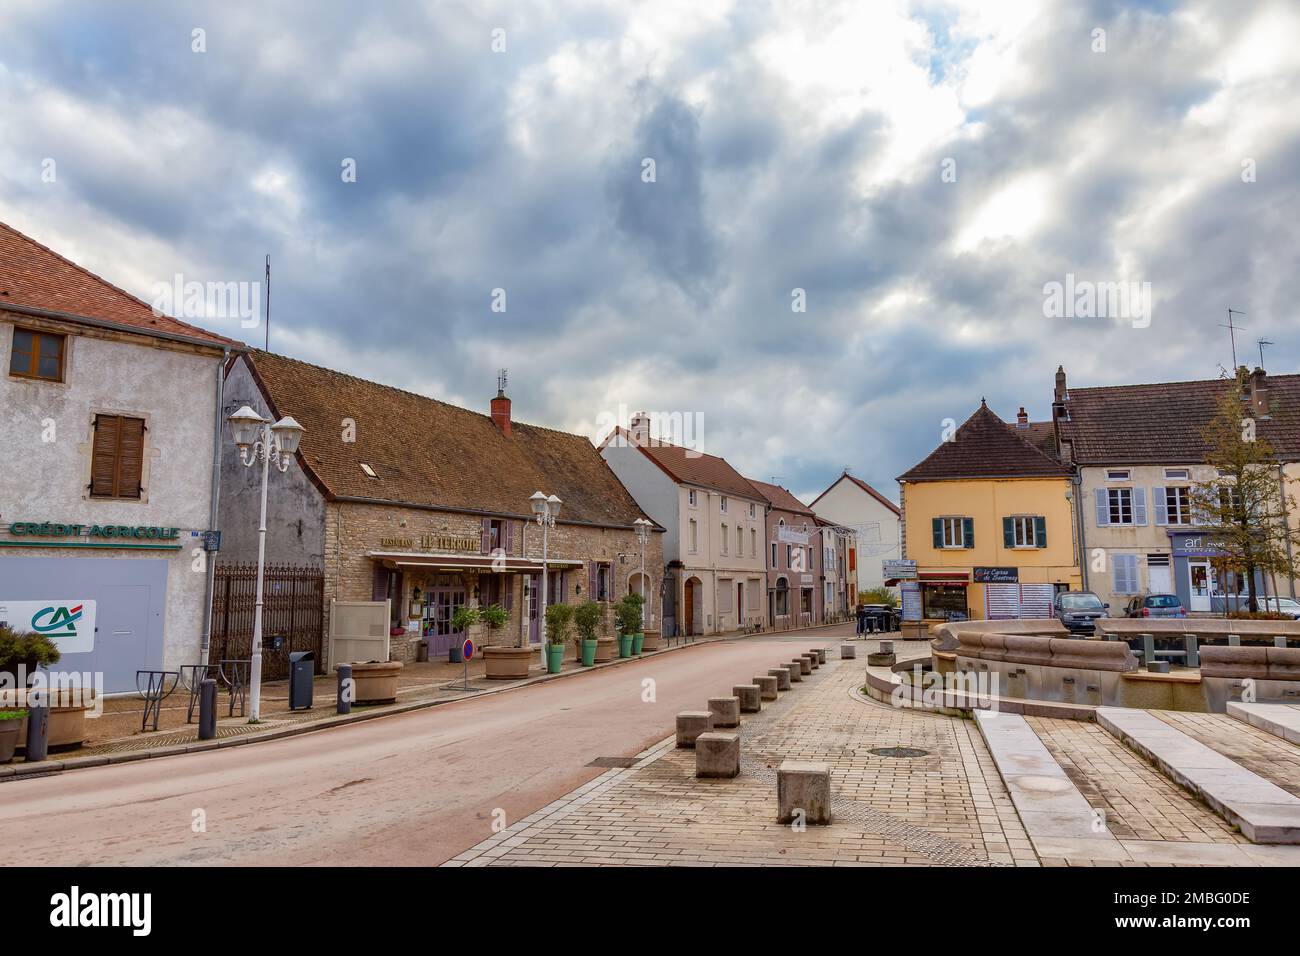 Streets in a small touristic town during cloudy fall season evening. Stock Photo